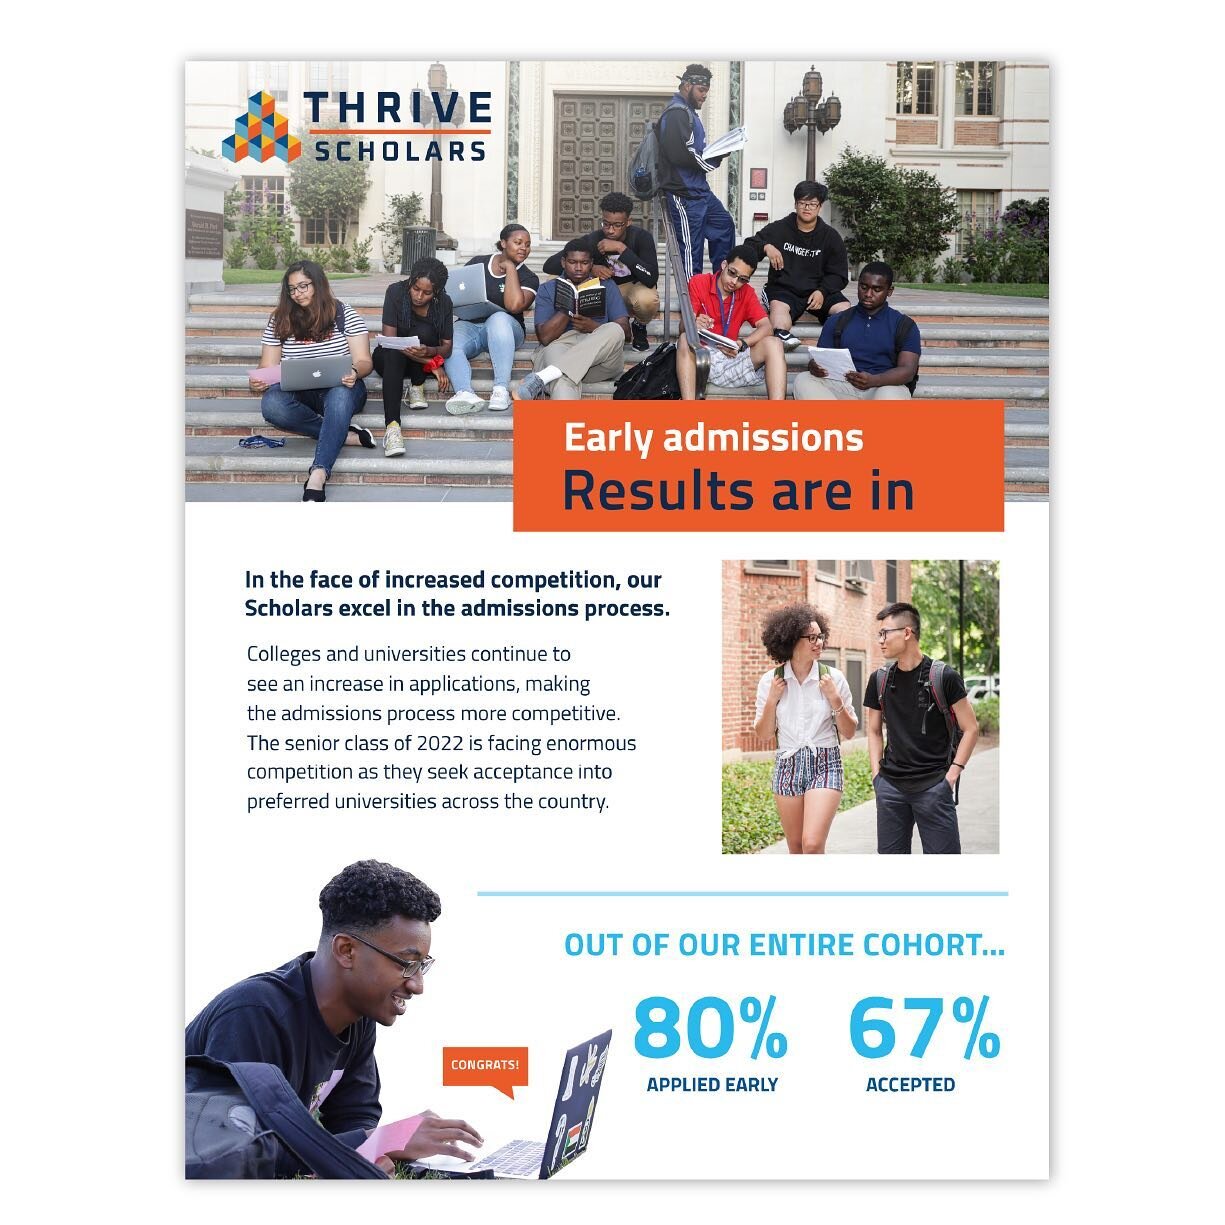 We designed this announcement for Thrive Scholars&rsquo; early admissions results. Their scholars had impressive admissions to top colleges and the organization wanted to get this message out to their community and supporters. 

Their Communications 